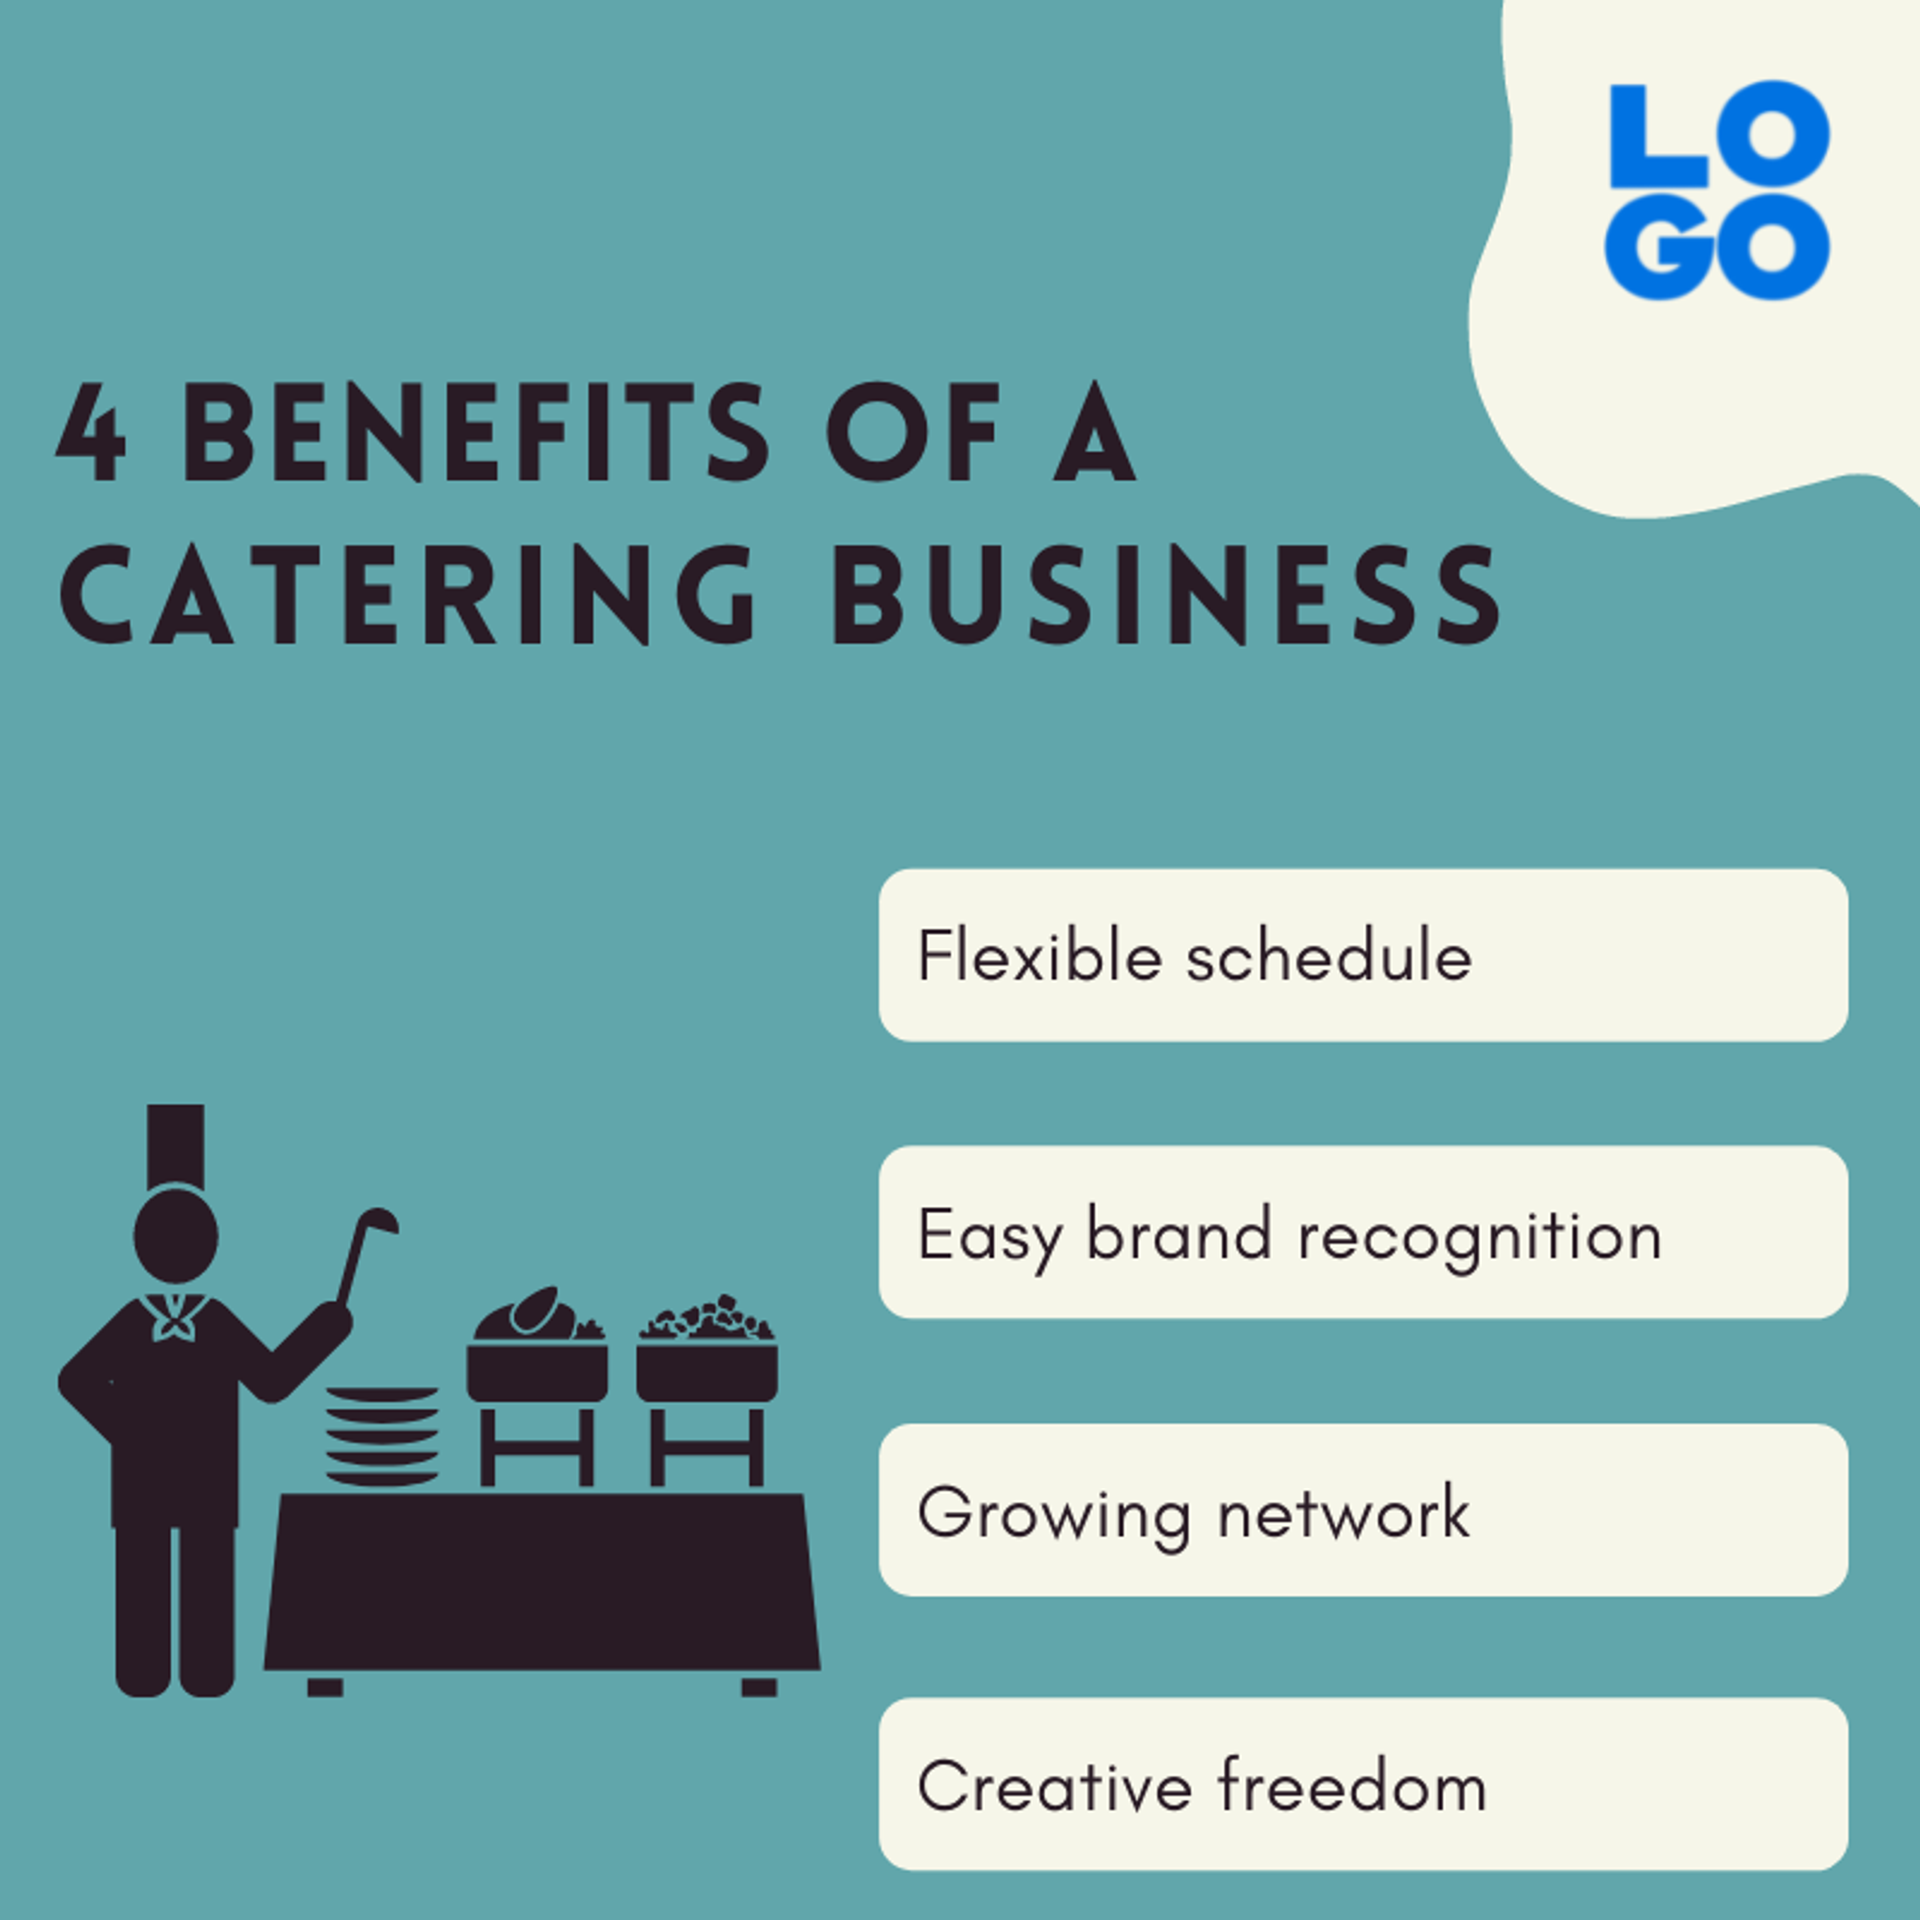 Benefits of a catering business